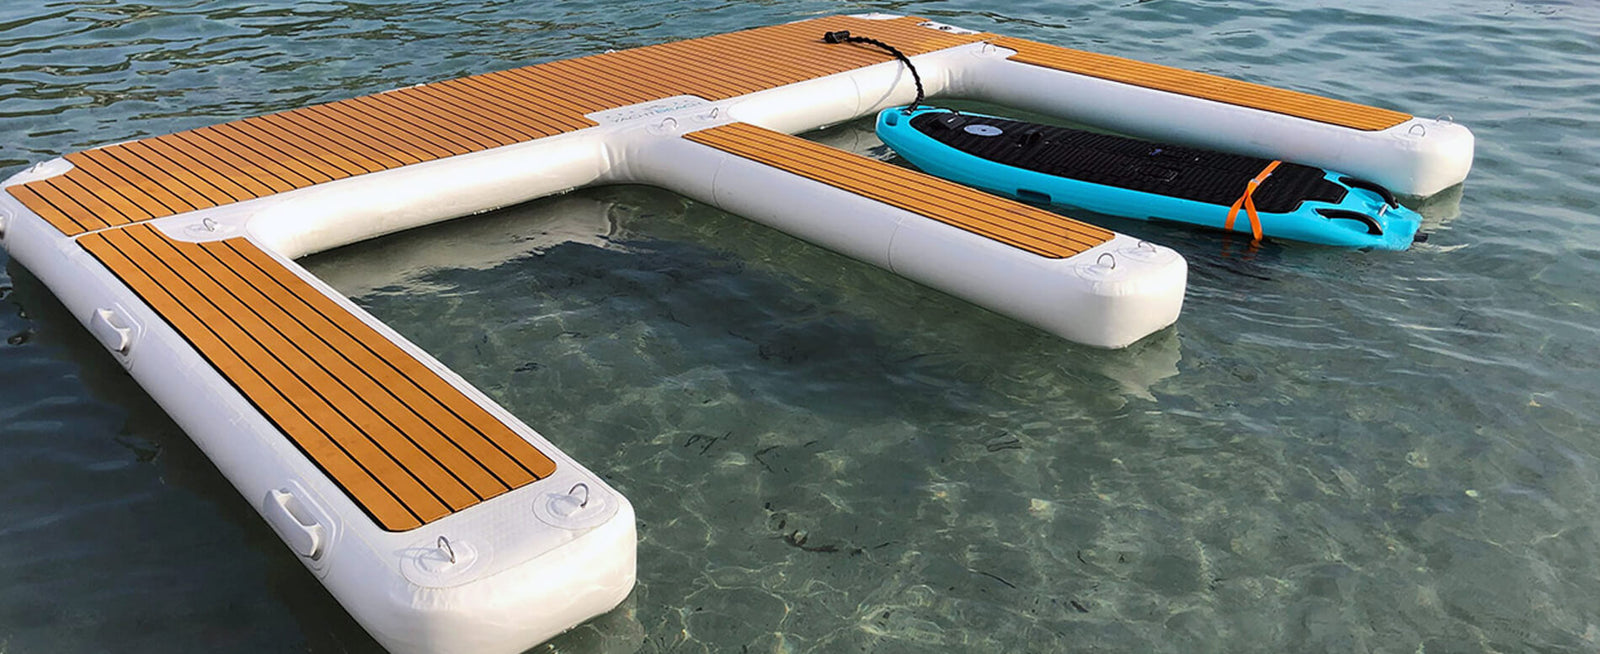 10 Best Inflatable Docks You Need To Add To Your Kit For Ultimate Fun -  GILI Sports